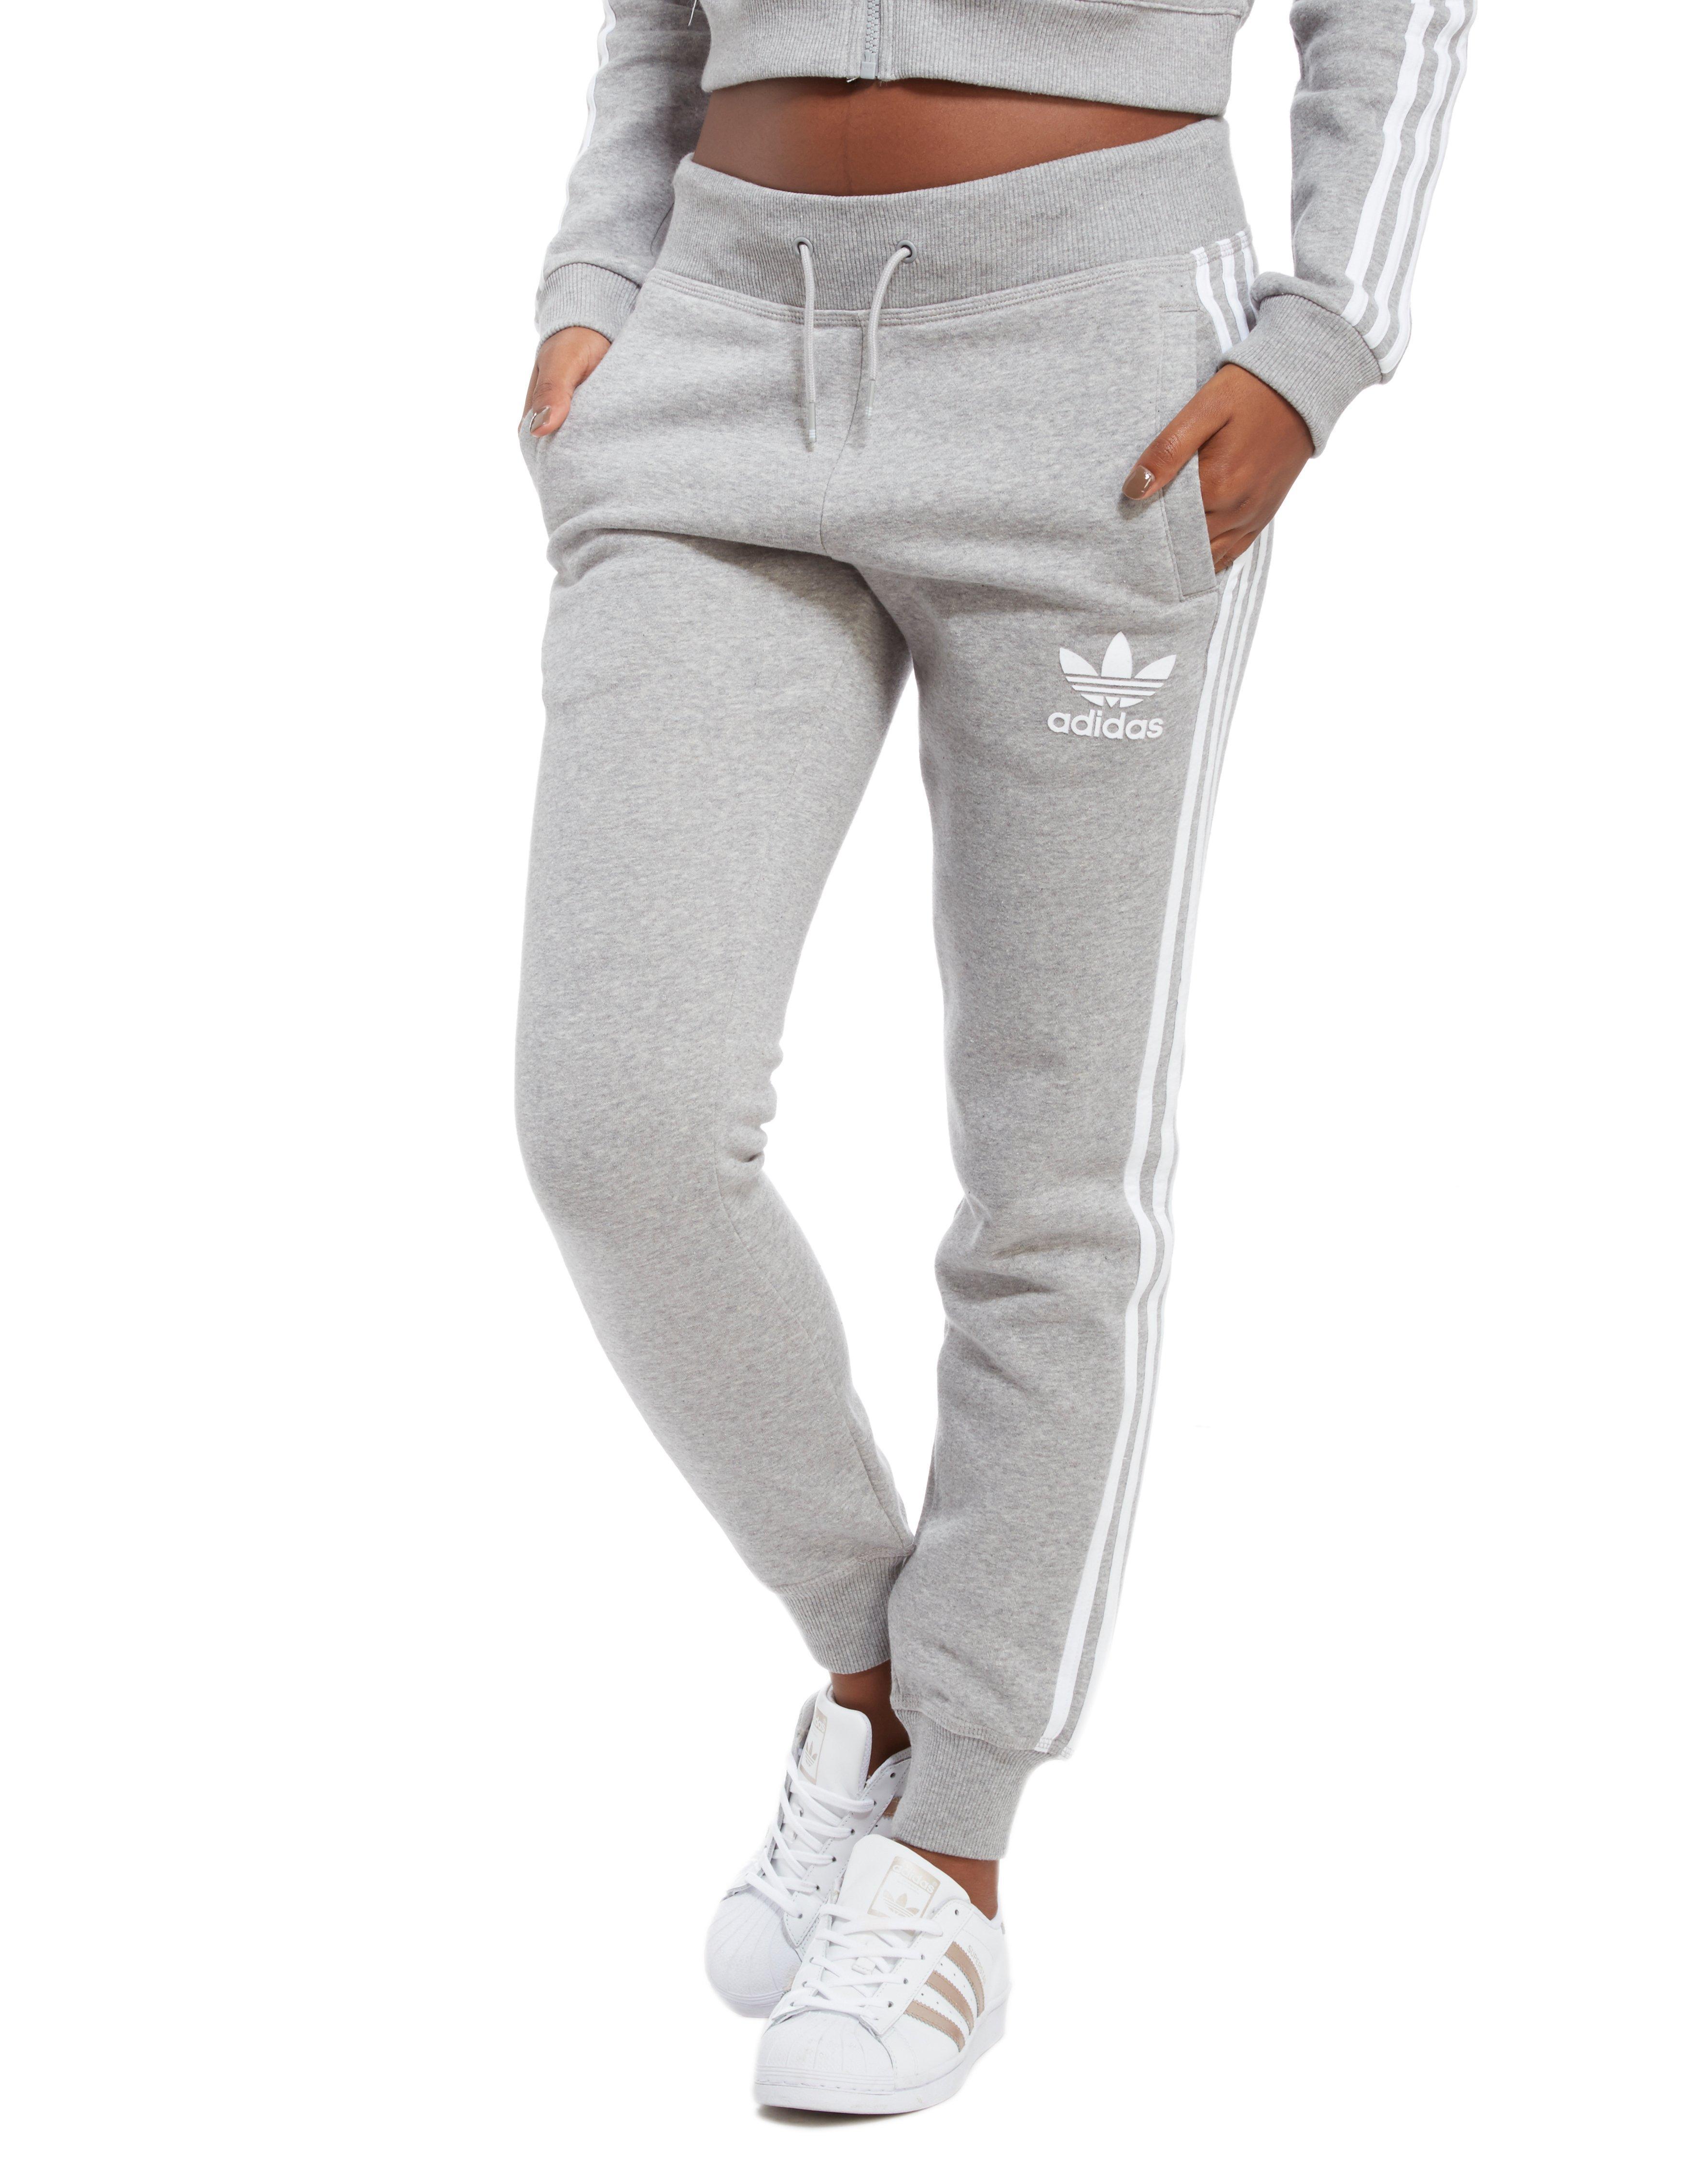 pink and grey adidas tracksuit